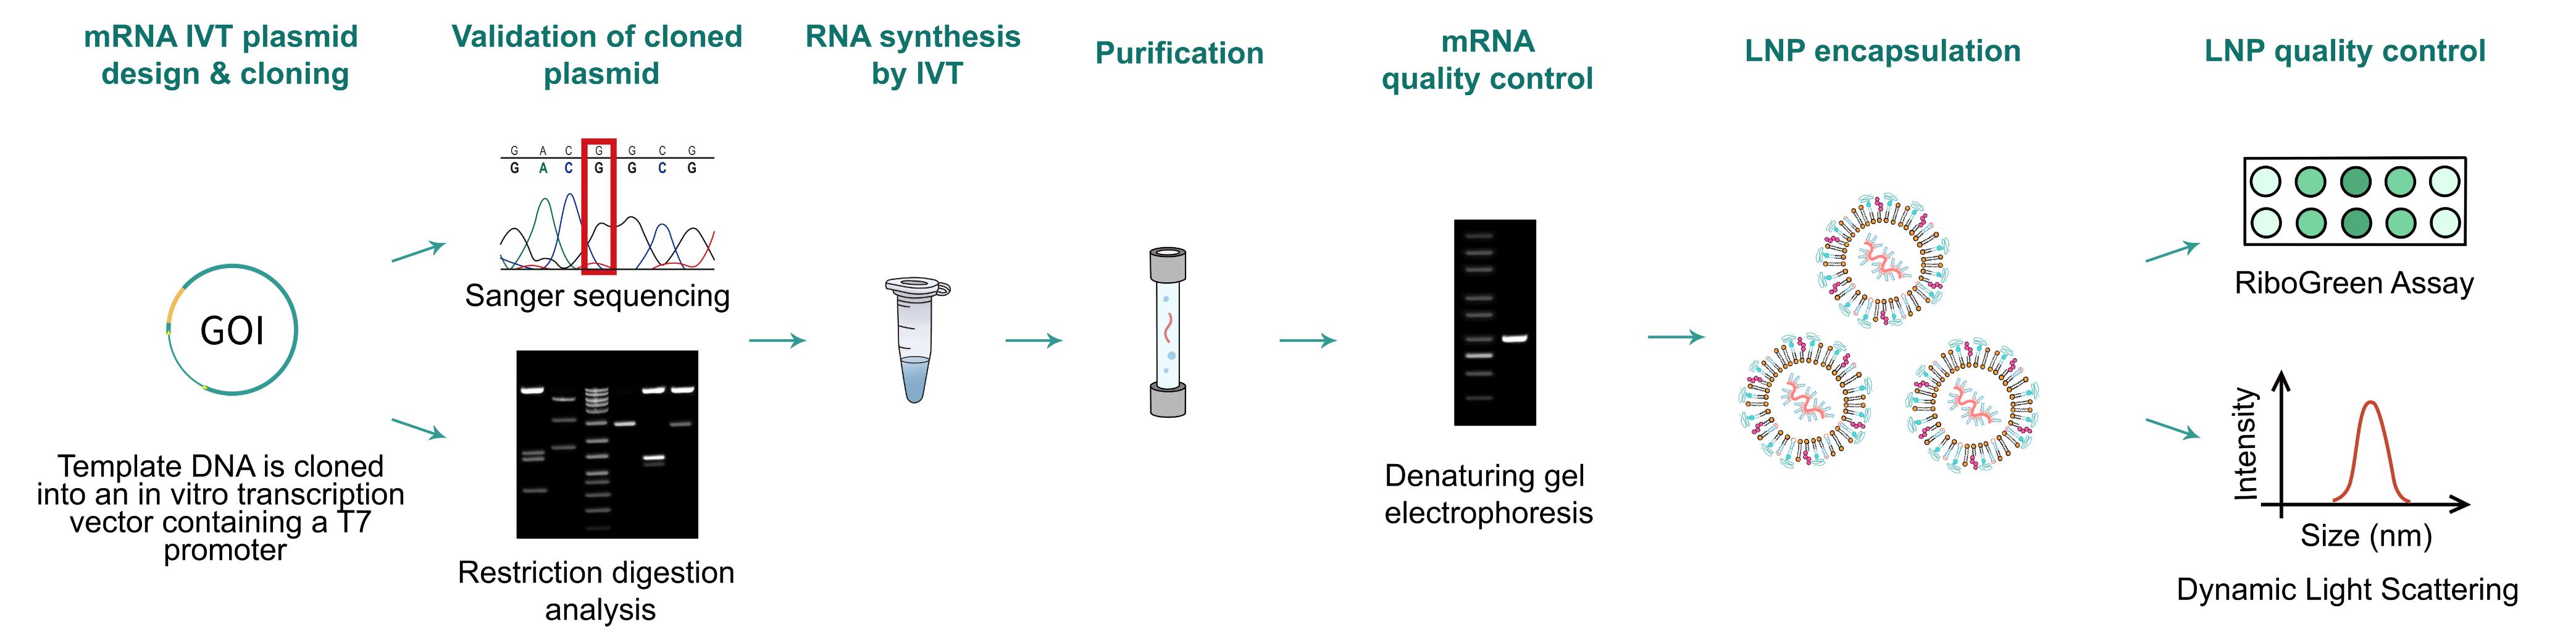 mRNA synthesis and QC > LNP encapsulation > LNP quality control (RiboGreen assay and dynamic light scattering).